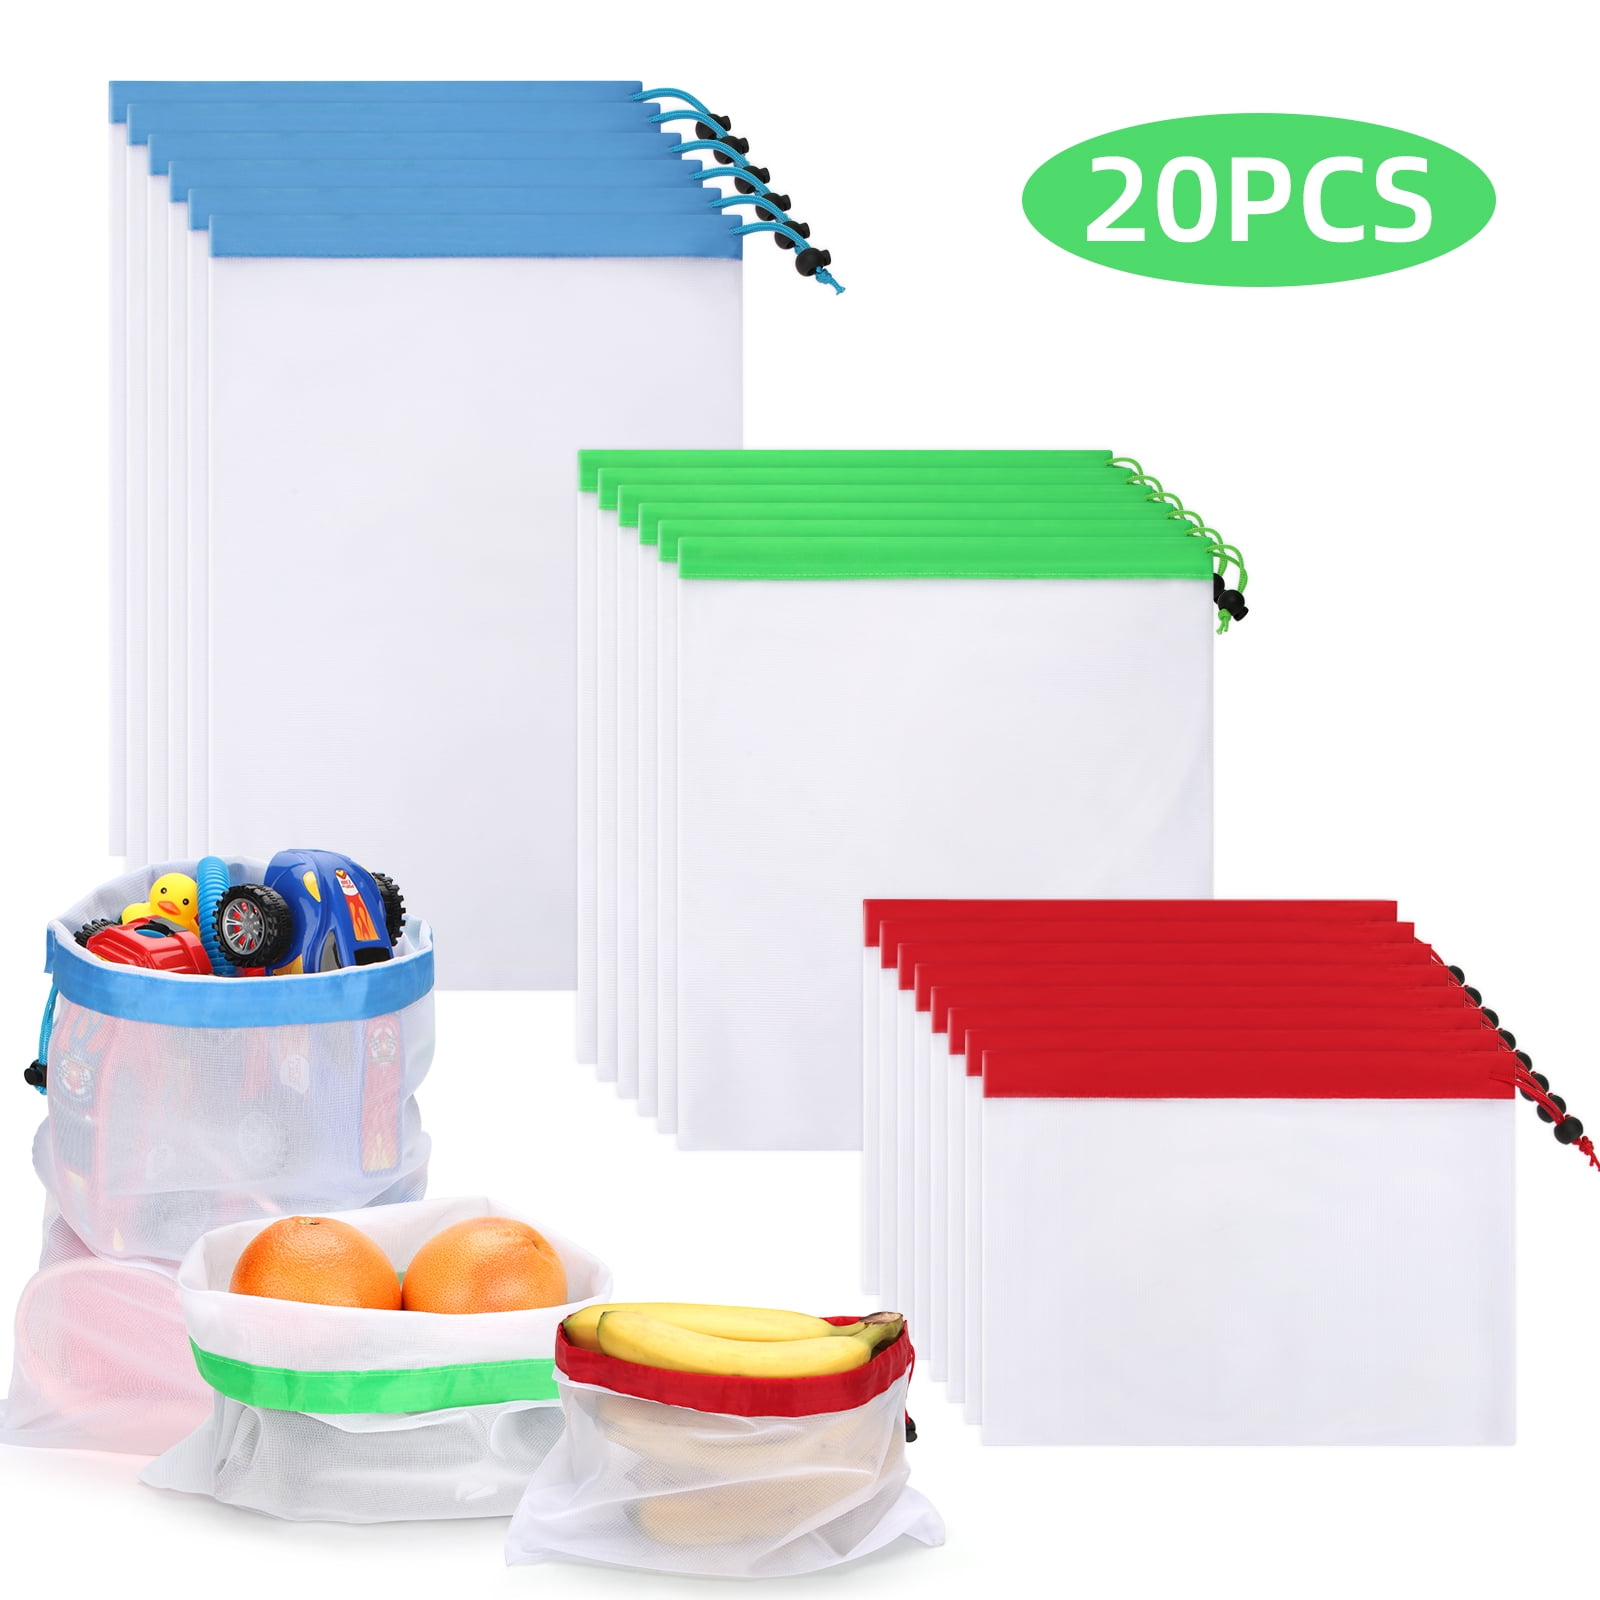 Ziploc® Gallon Freezer Bags with Stay Open Design Mega Pack, 60 ct - Food 4  Less